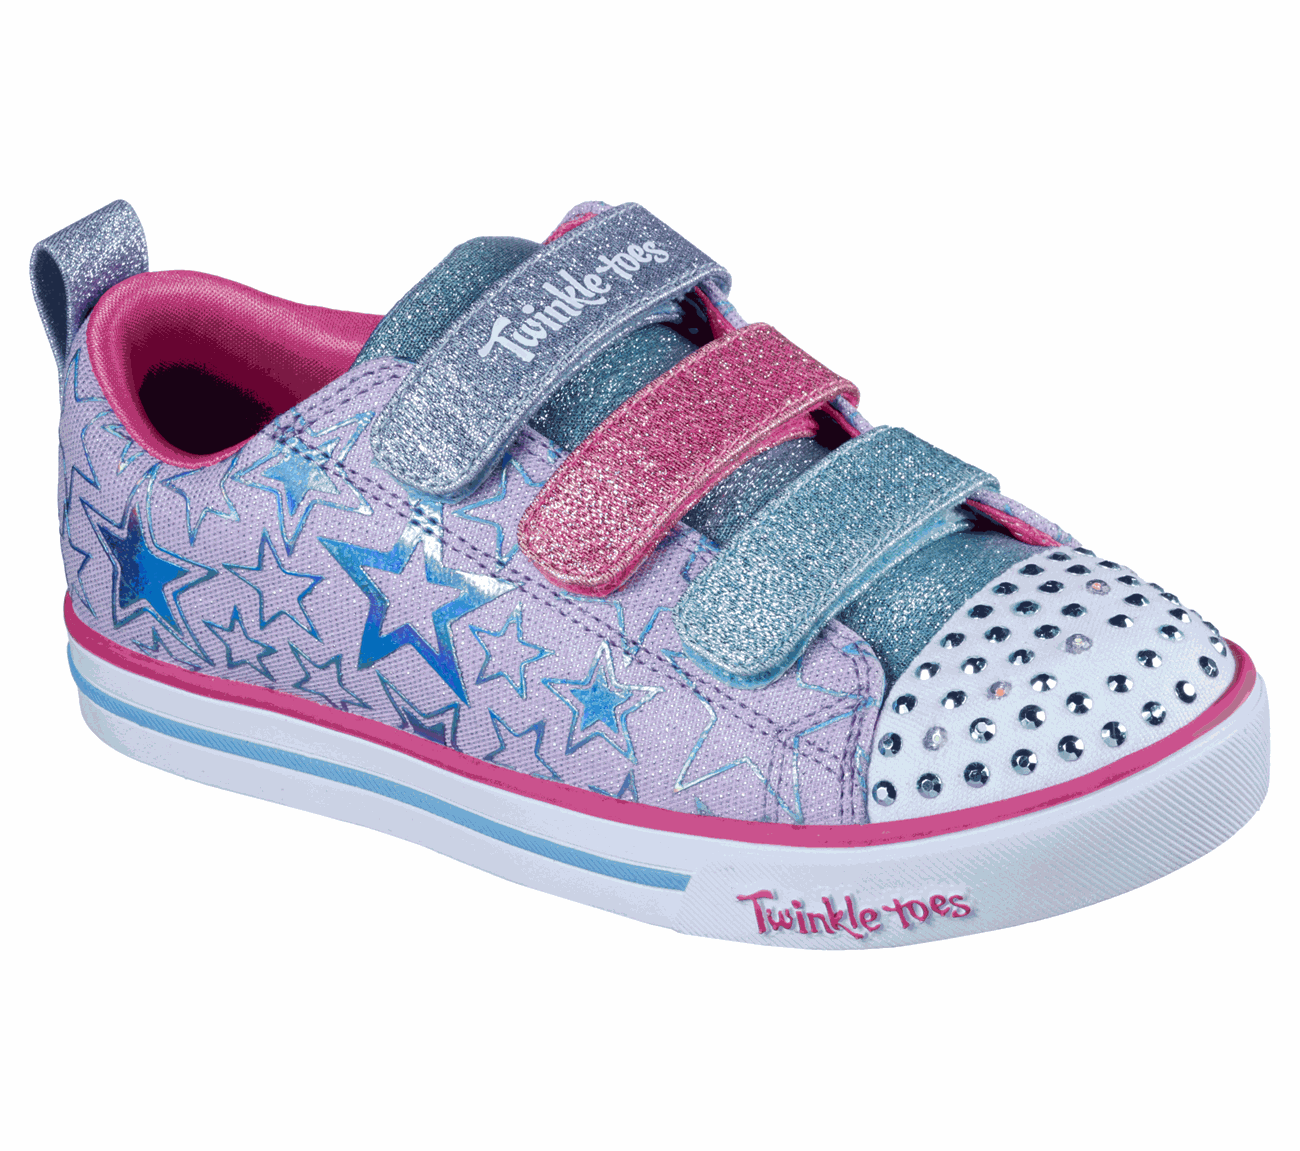 skechers toddler twinkle toes shoes